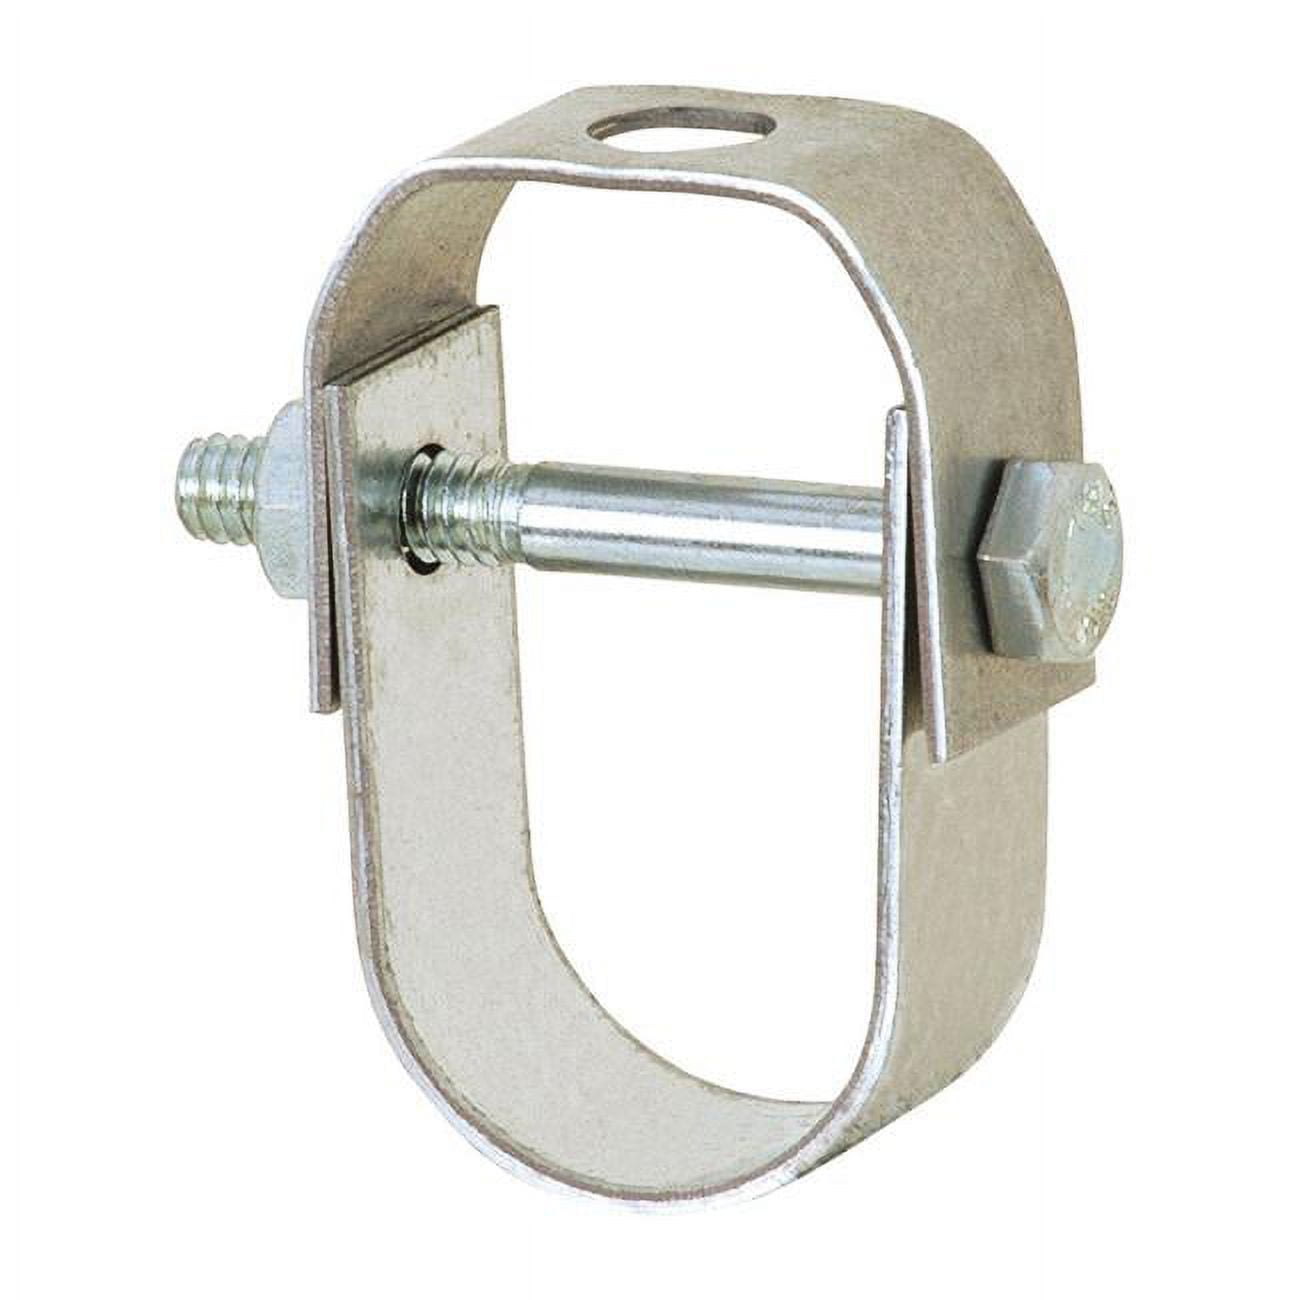 Sioux Chief 4905188 Galvanized Clevis Hanger, 1.5 In. - Pack Of 10